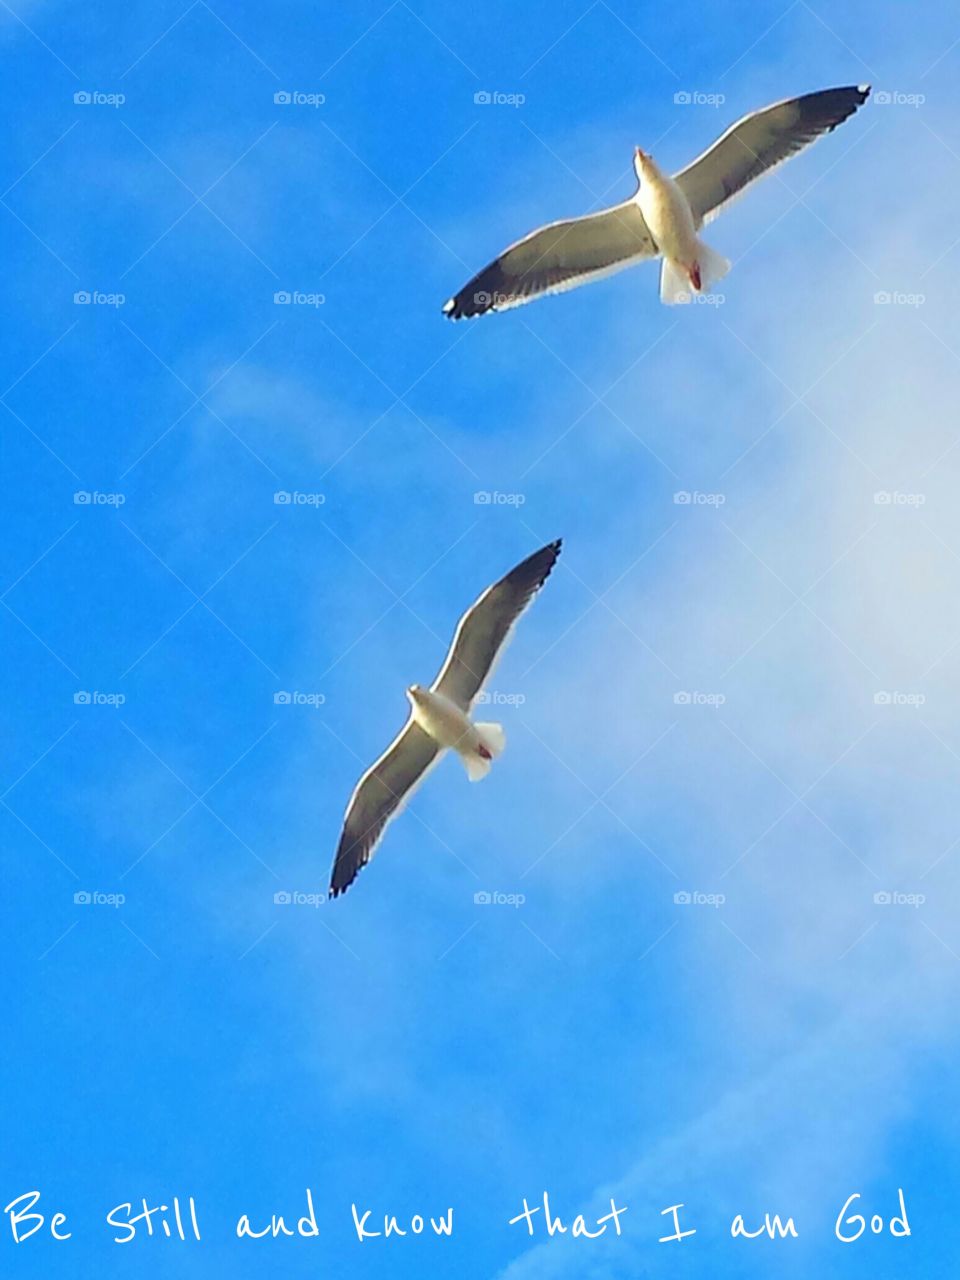 "Seagulls In Flight ". Be Still And know That I Am God